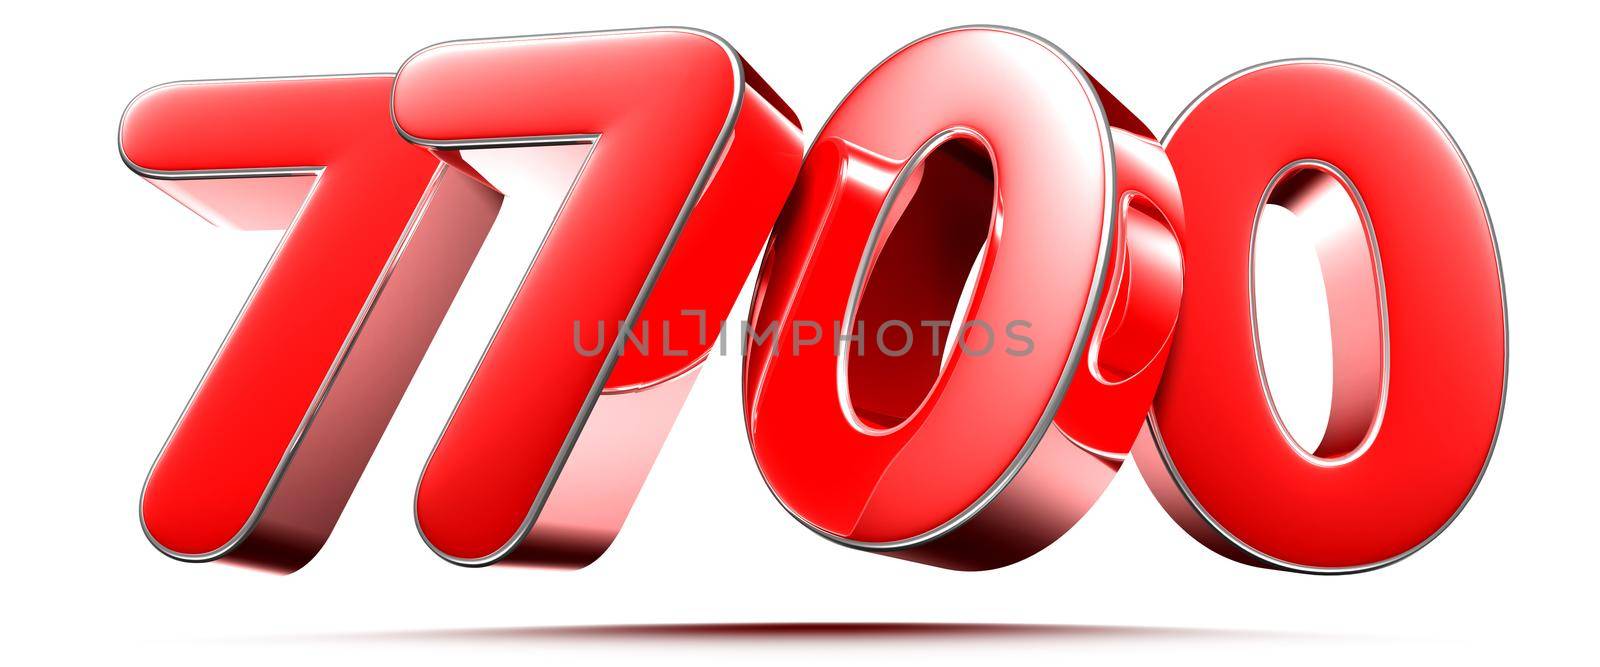 Rounded red numbers 7700 on white background 3D illustration with clipping path by thitimontoyai